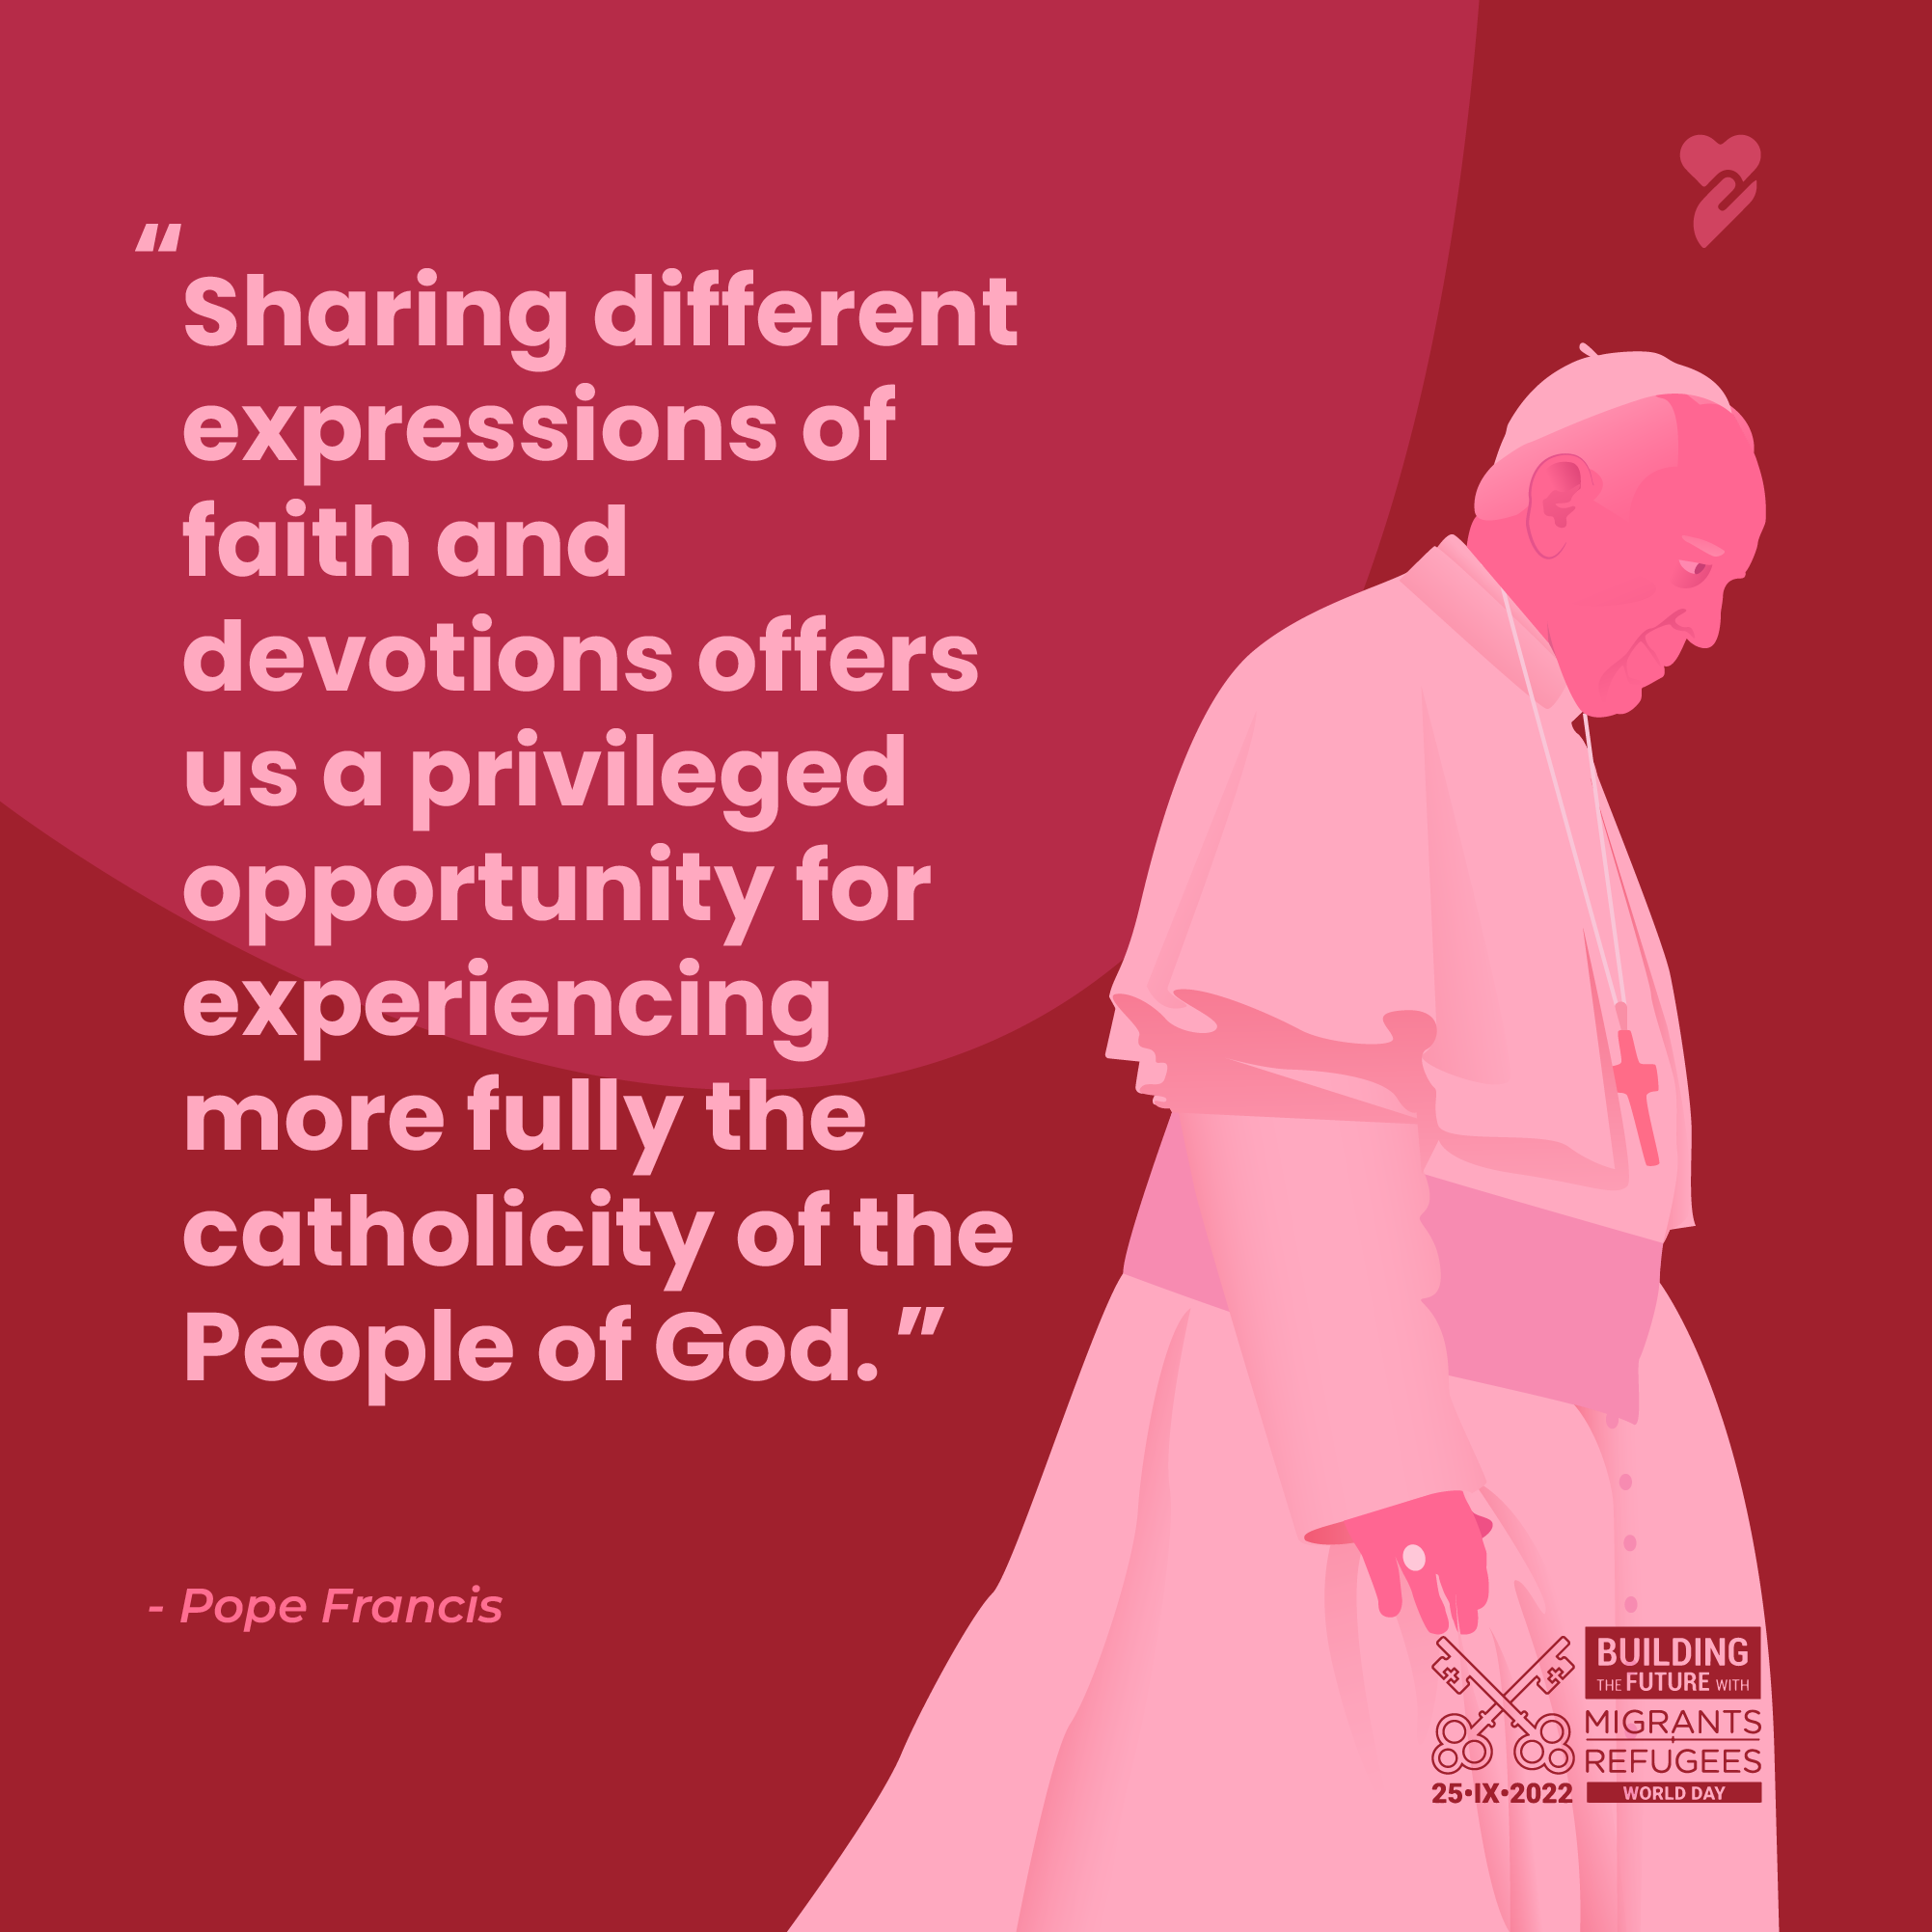 "Sharing different expressions of faith and devotions offers us a privileged opportunity for experiencing more fully the catholicity of the People of God." Pope Francis